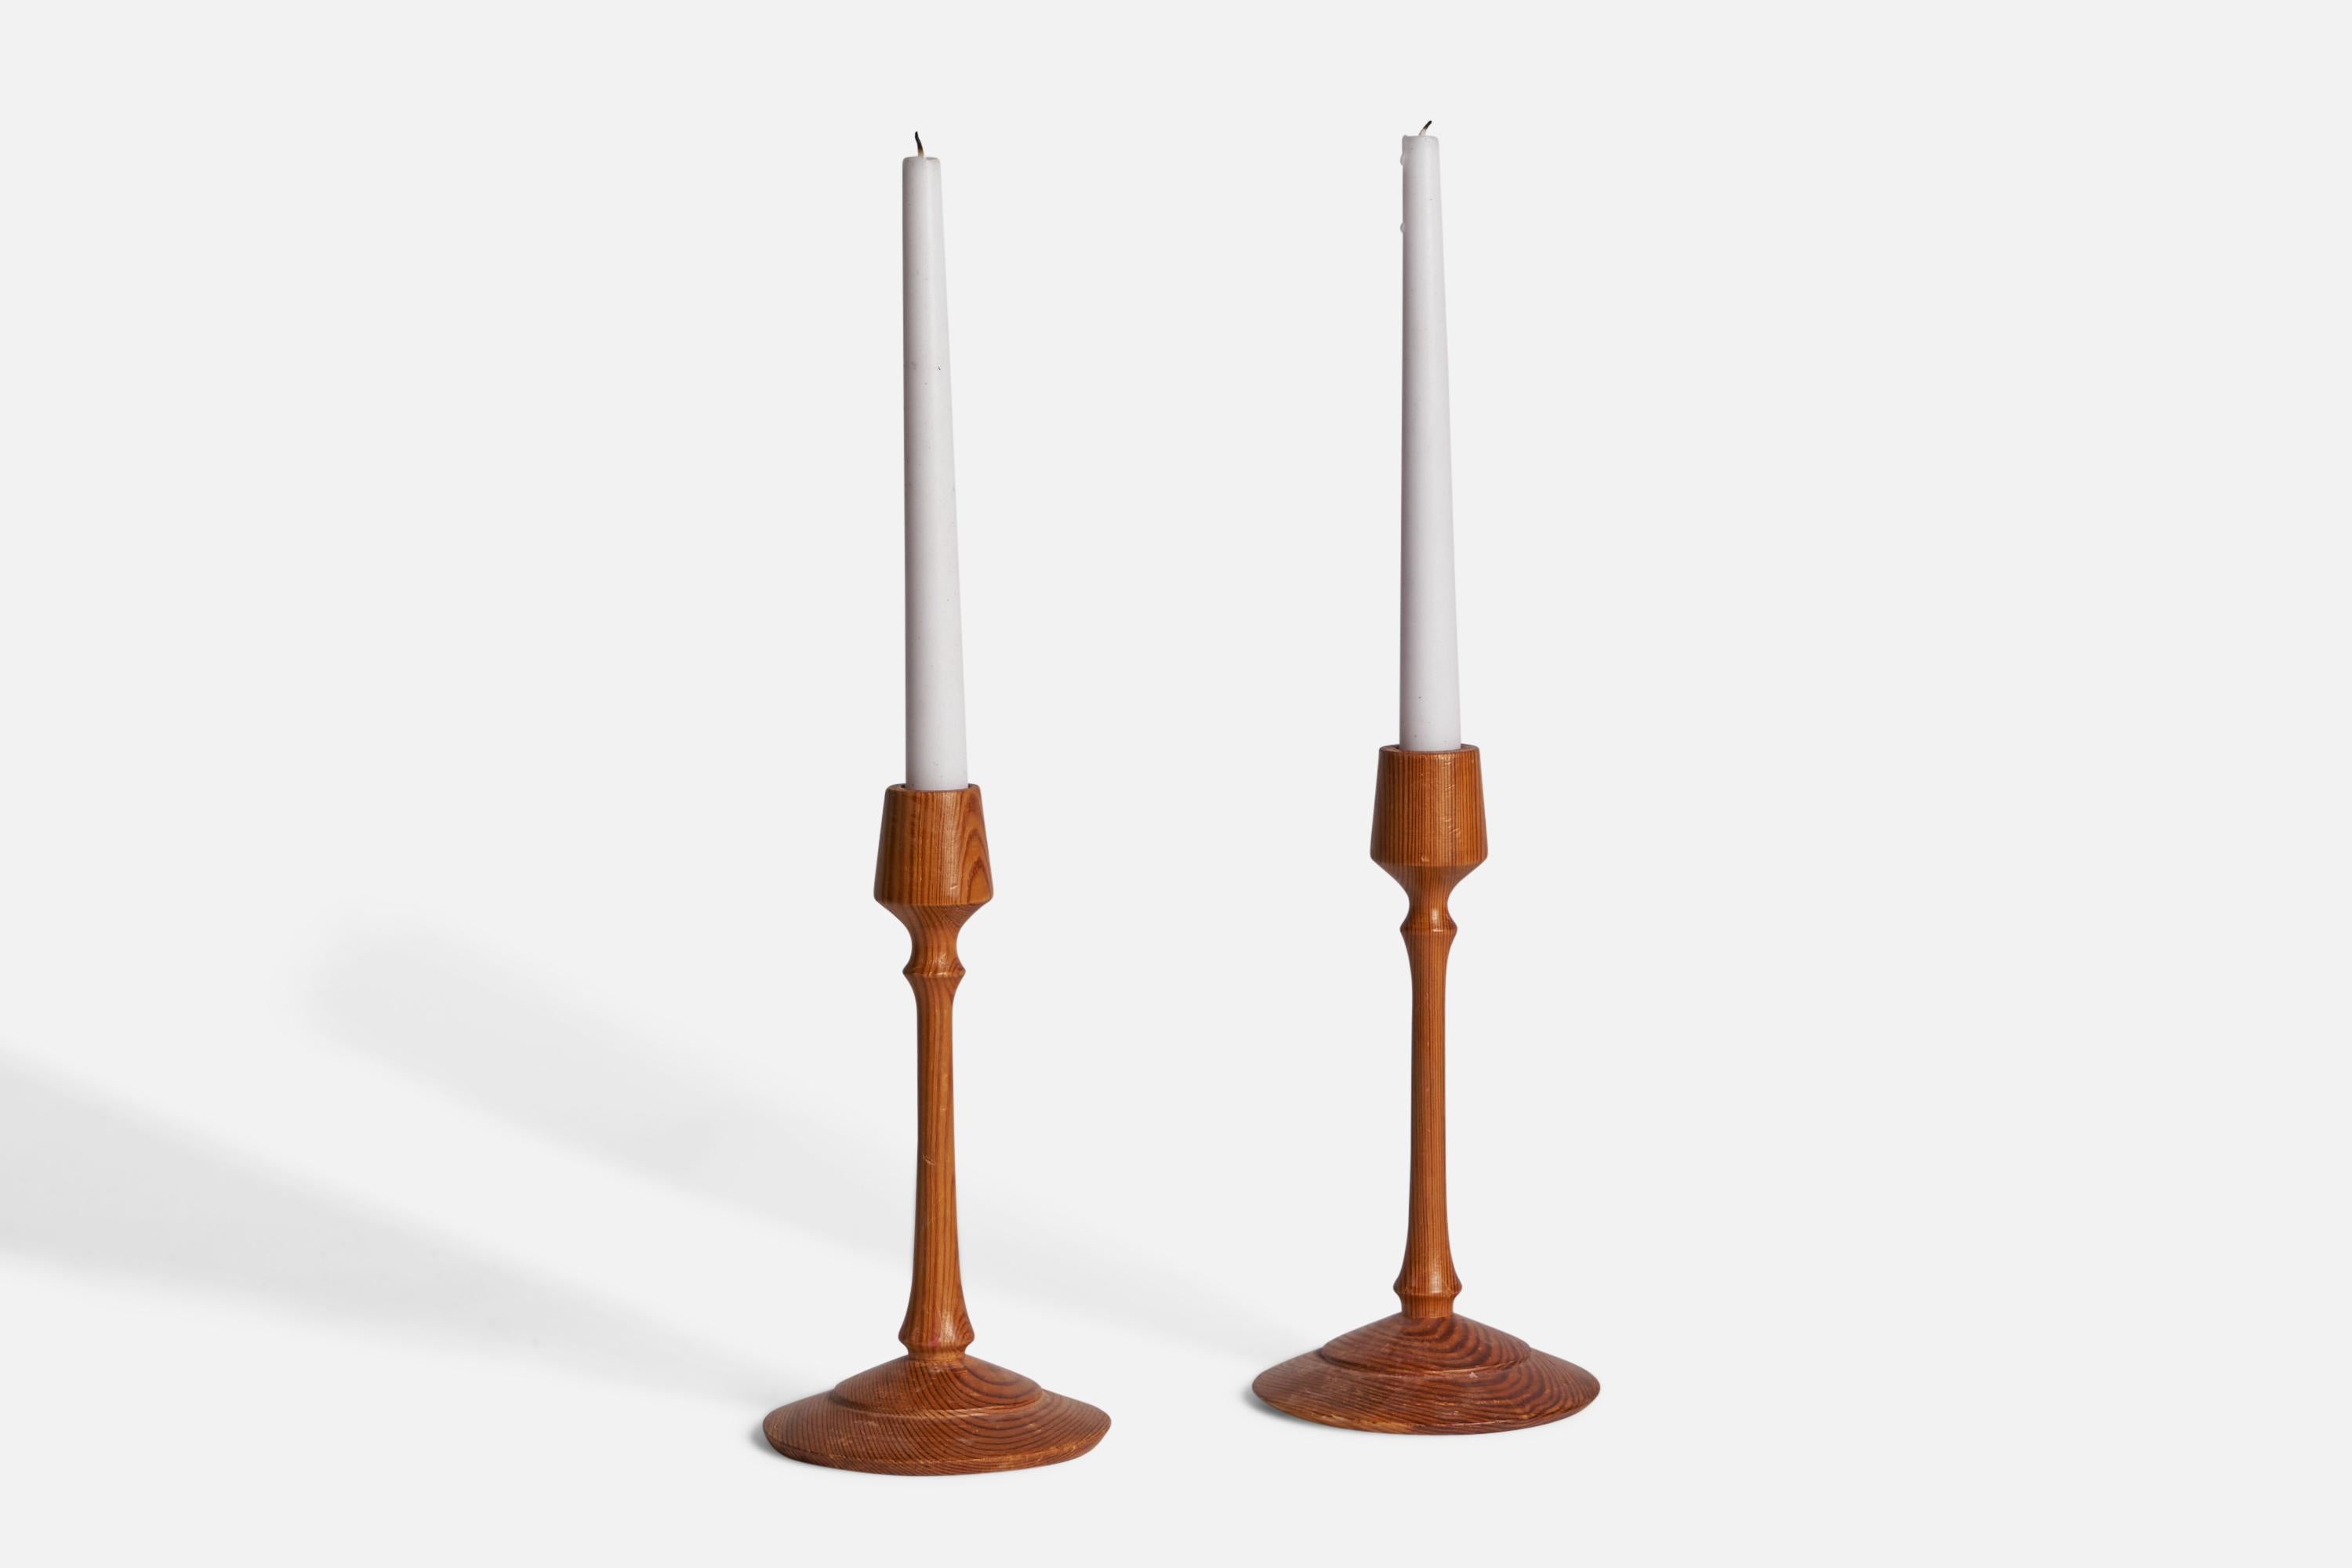 A pair of pine candlesticks designed and produced in Sweden, c. 1970s.

Fits 0.85” diameter candles